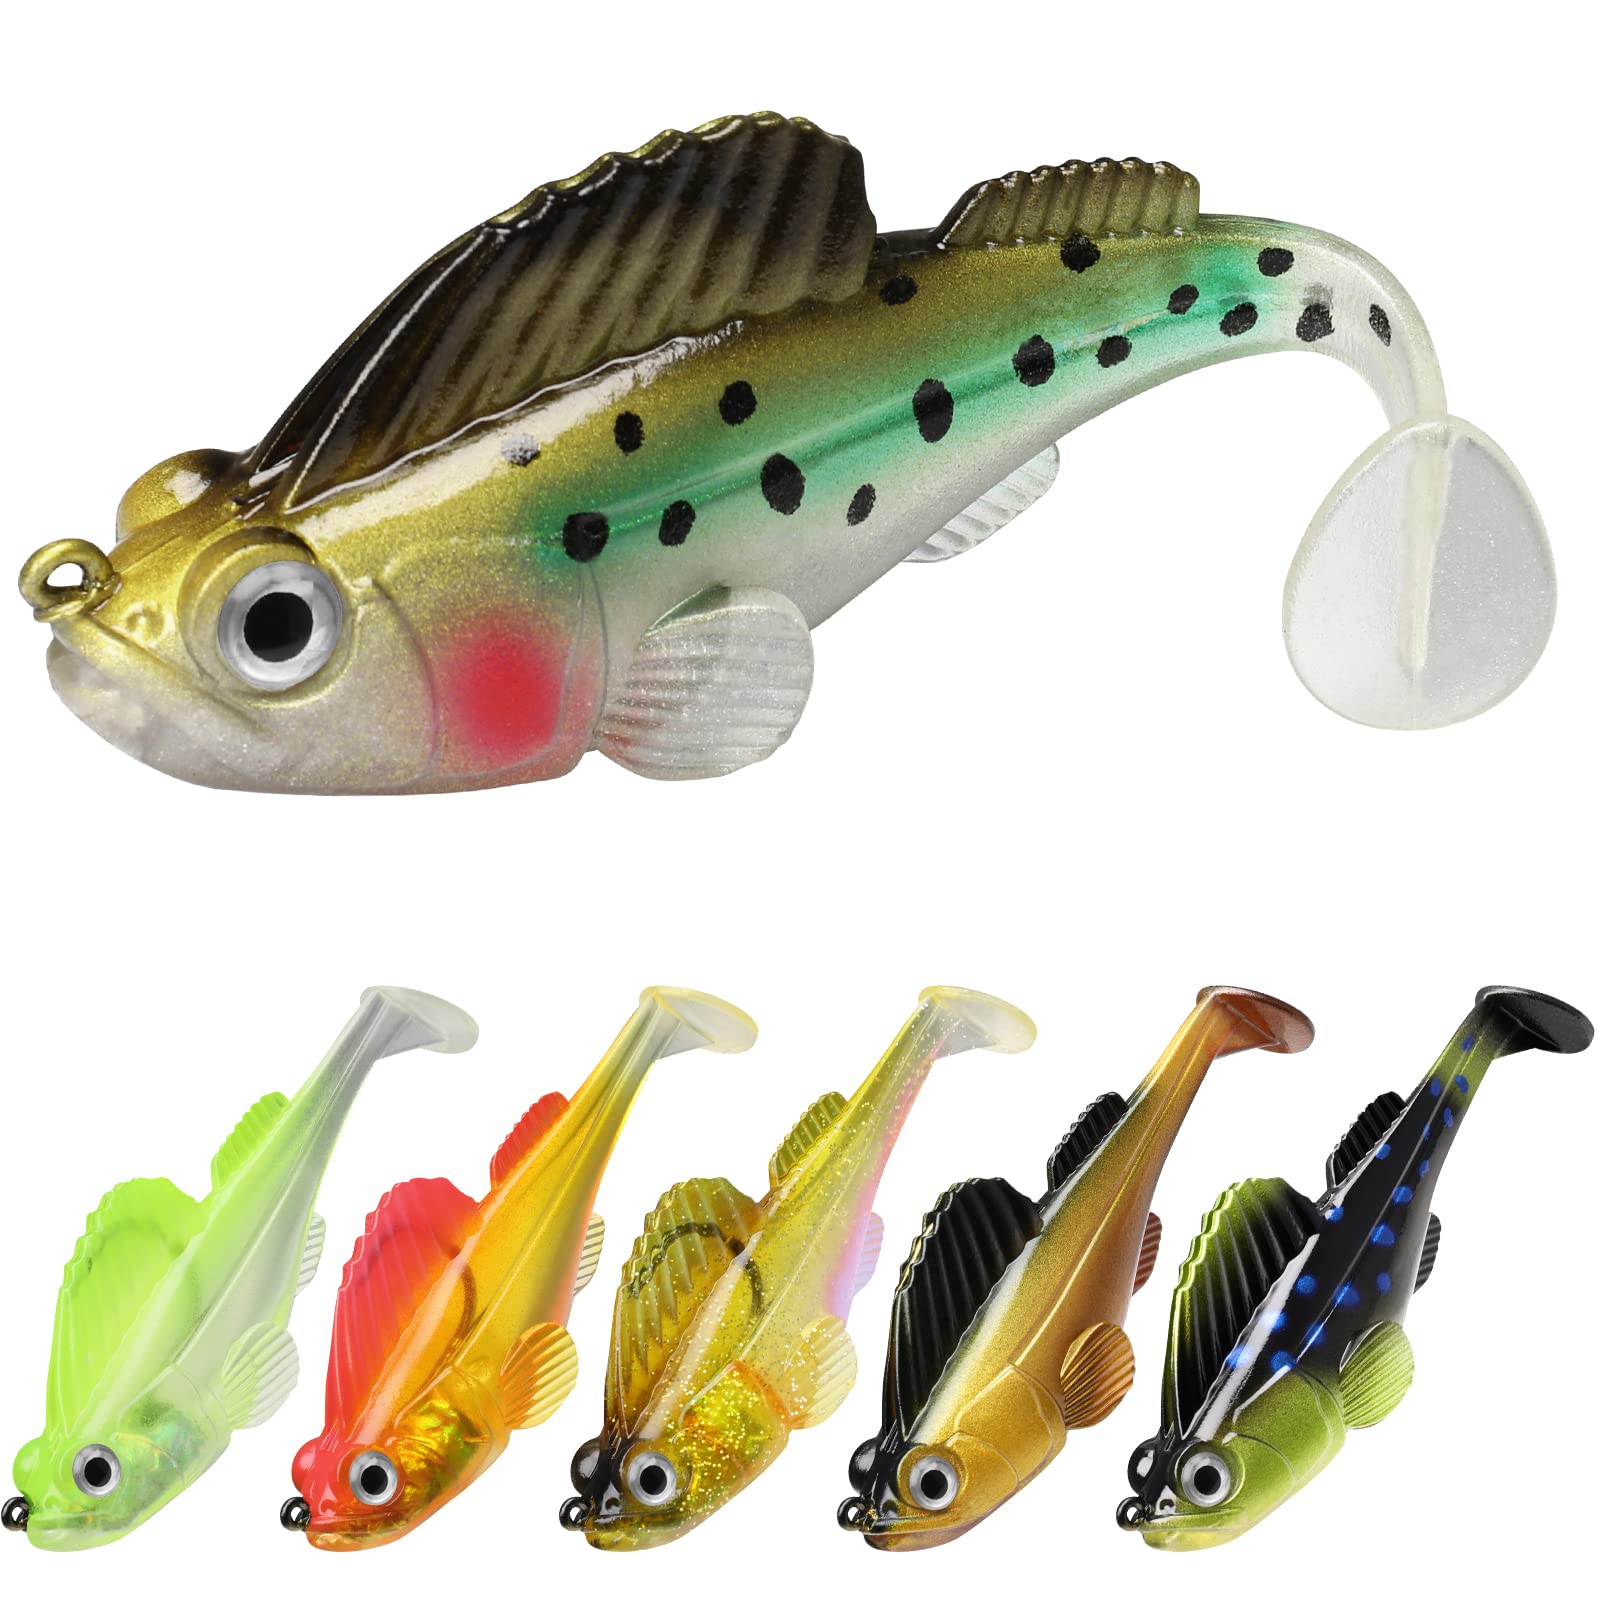 GOTOUR Pre-Rigged Jig Head Fishing Lures, Soft Jointed Swimbaits for Bass  Fishing, Great Weedless Bass Lures, Tadpole Lure with Spinner, Walleye Shad  Baits, Fishing Jigs for Freshwater and Saltwater A-2.8-0.4oz